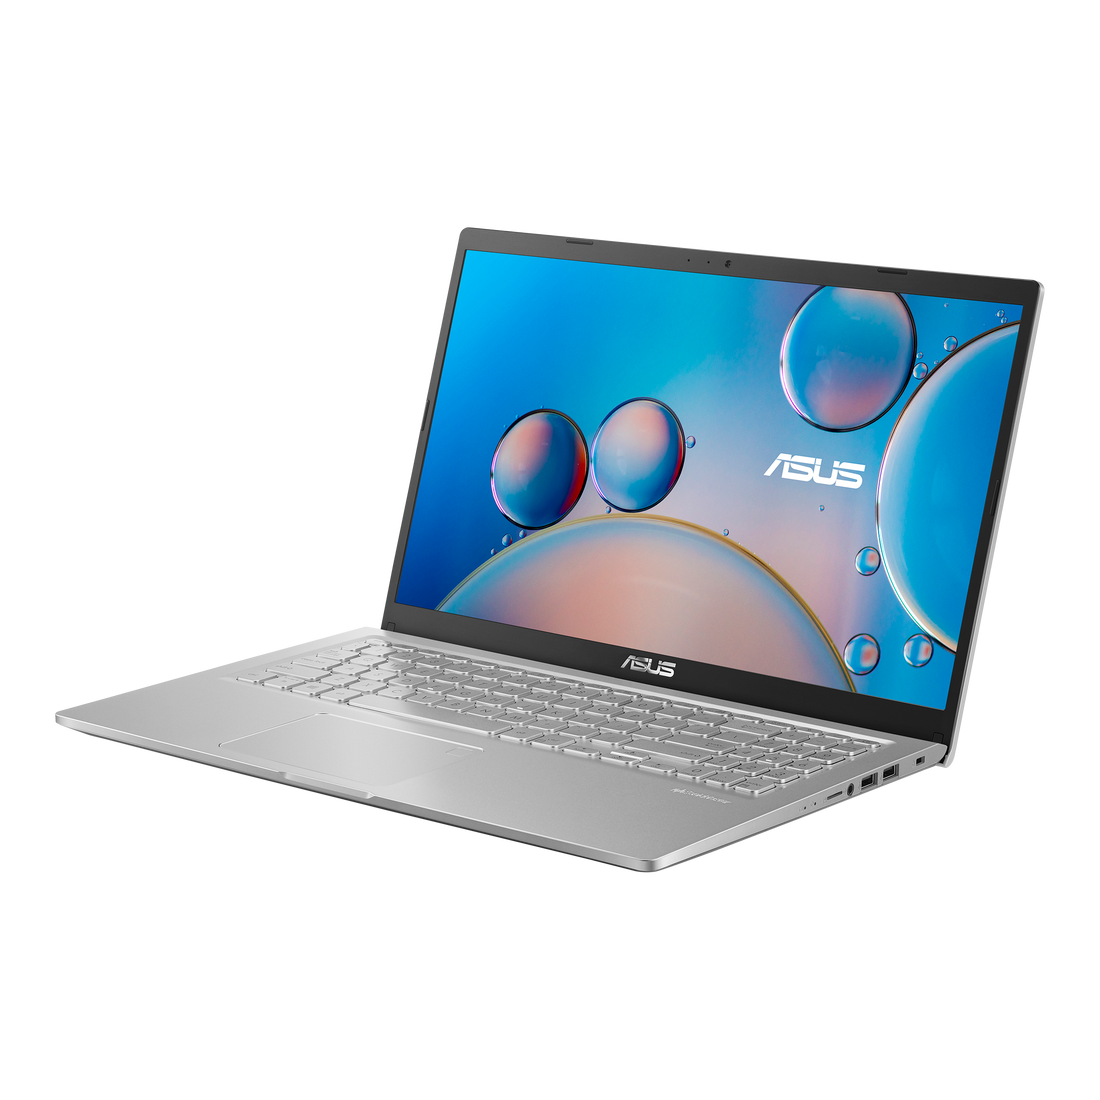 ASUS Vivobook 15, 15.6-inch (39.62 cms) FHD, AMD Ryzen 5 3500U, Thin and Light Laptop (8GB/512GB SSD/Integrated Graphics/Windows 11/Office 2021/Silver/1.8 kg), M515DA-BQ512WS, Transparent Silver-Laptops-ASUS-computerspace